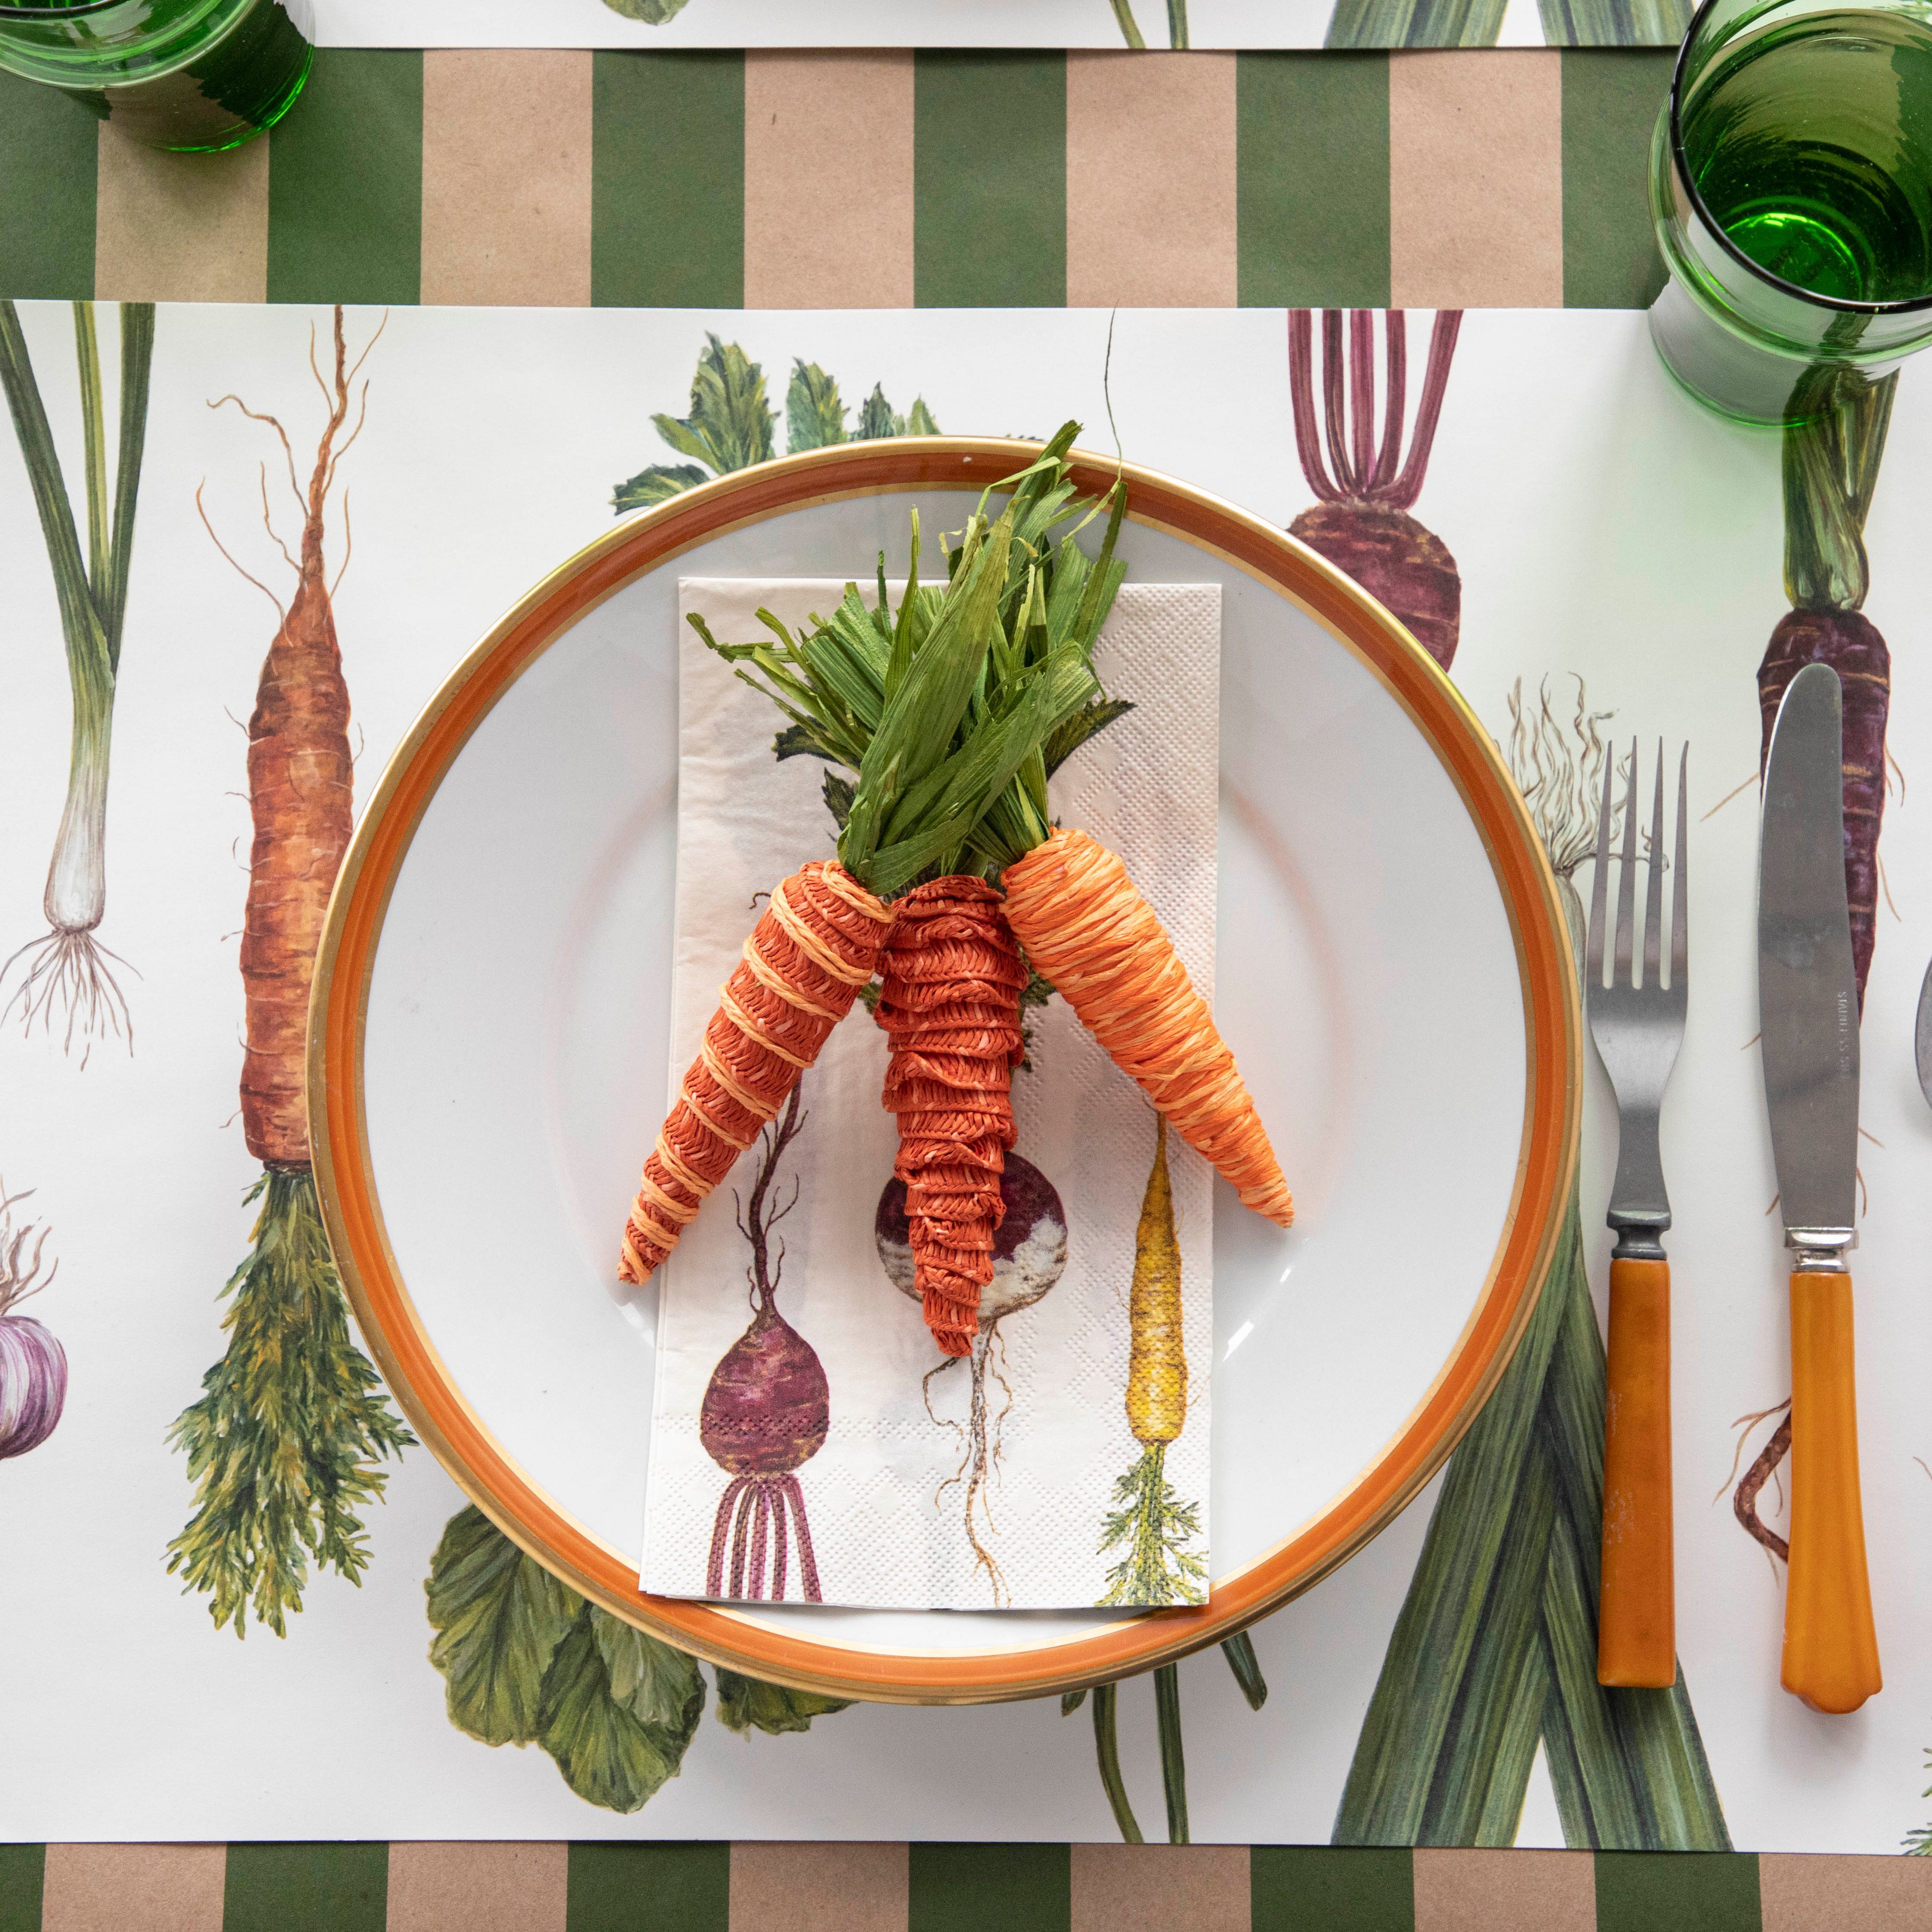 A plate of fresh carrots on a table with a vegetable-themed tablecloth, flanked by cutlery with orange handles.